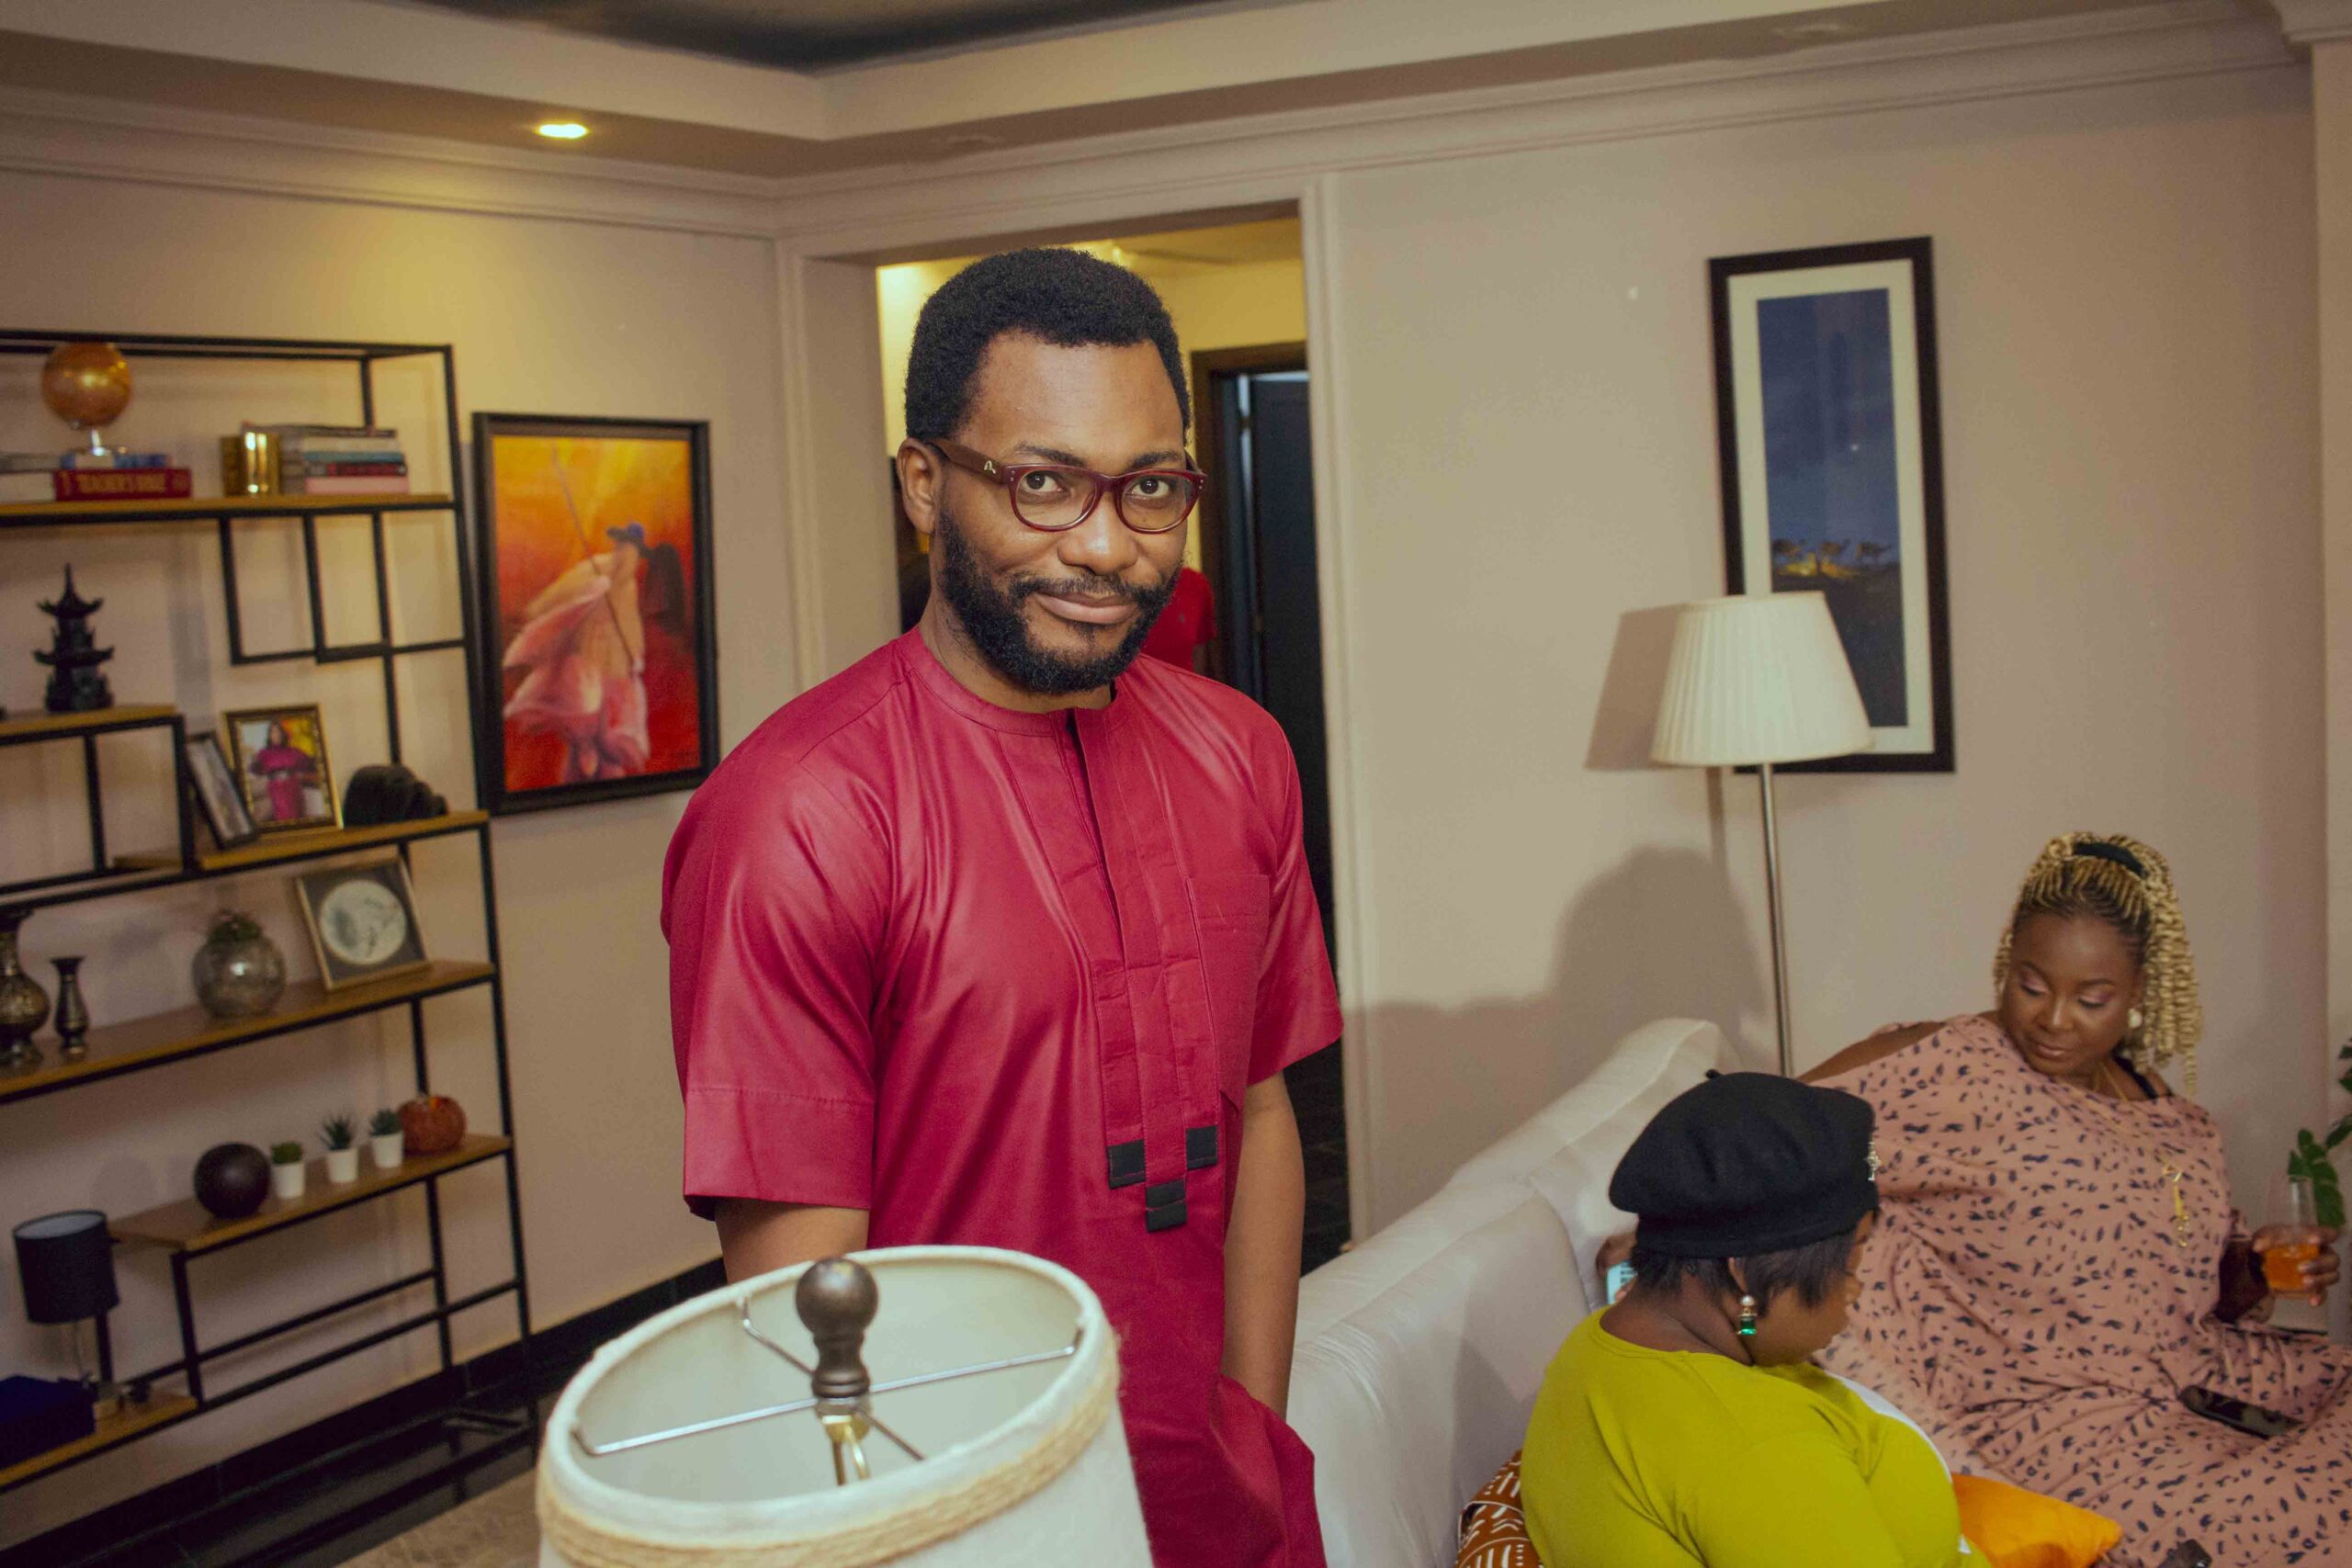 IMG 5074 scaled - ‘The Wives’ Starring Tope Tedela, Anee Icha, Sharon Rotimi, Tomi Ojo, Patrick Diabuah and Directed by Orire Nwani wraps Principal Photography